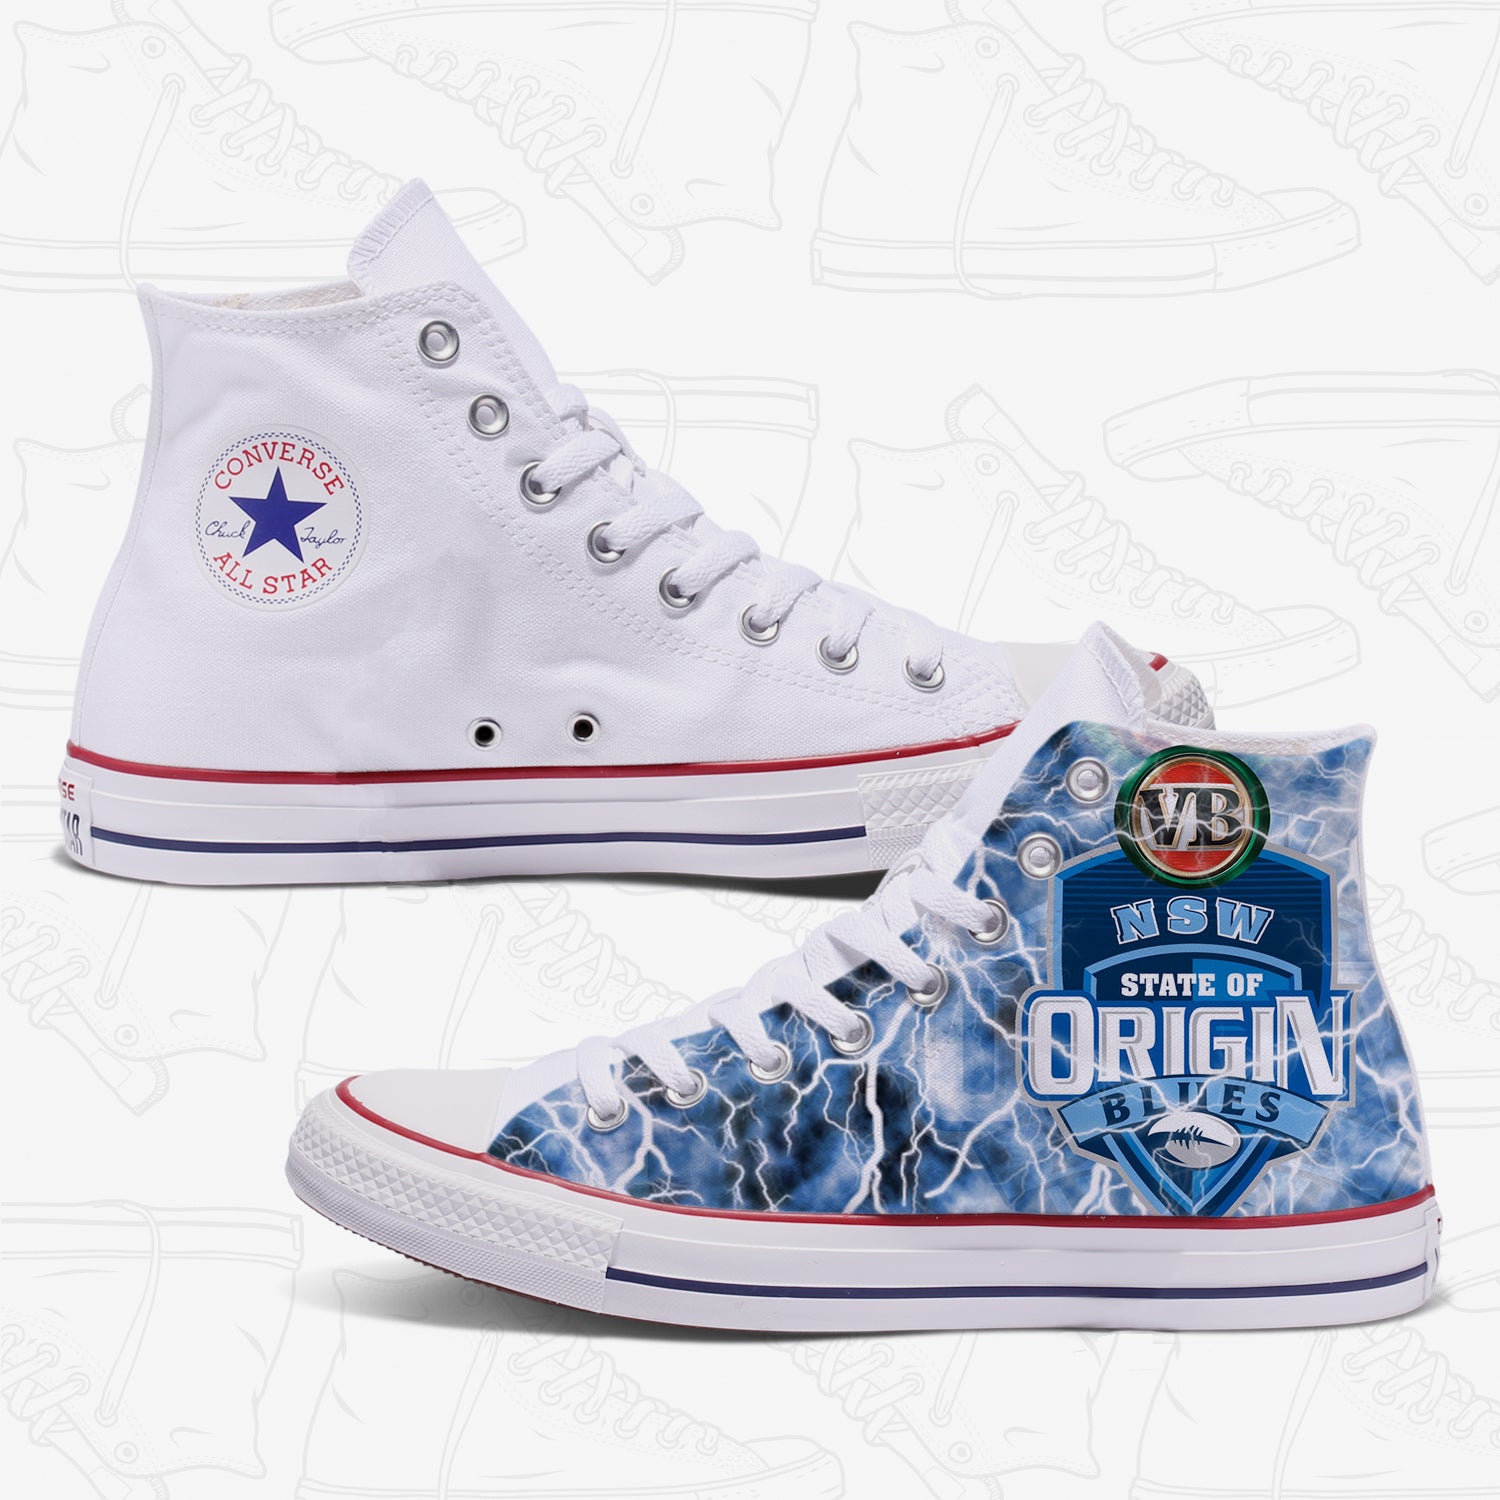 NSW State of Origin Adult Converse Shoes